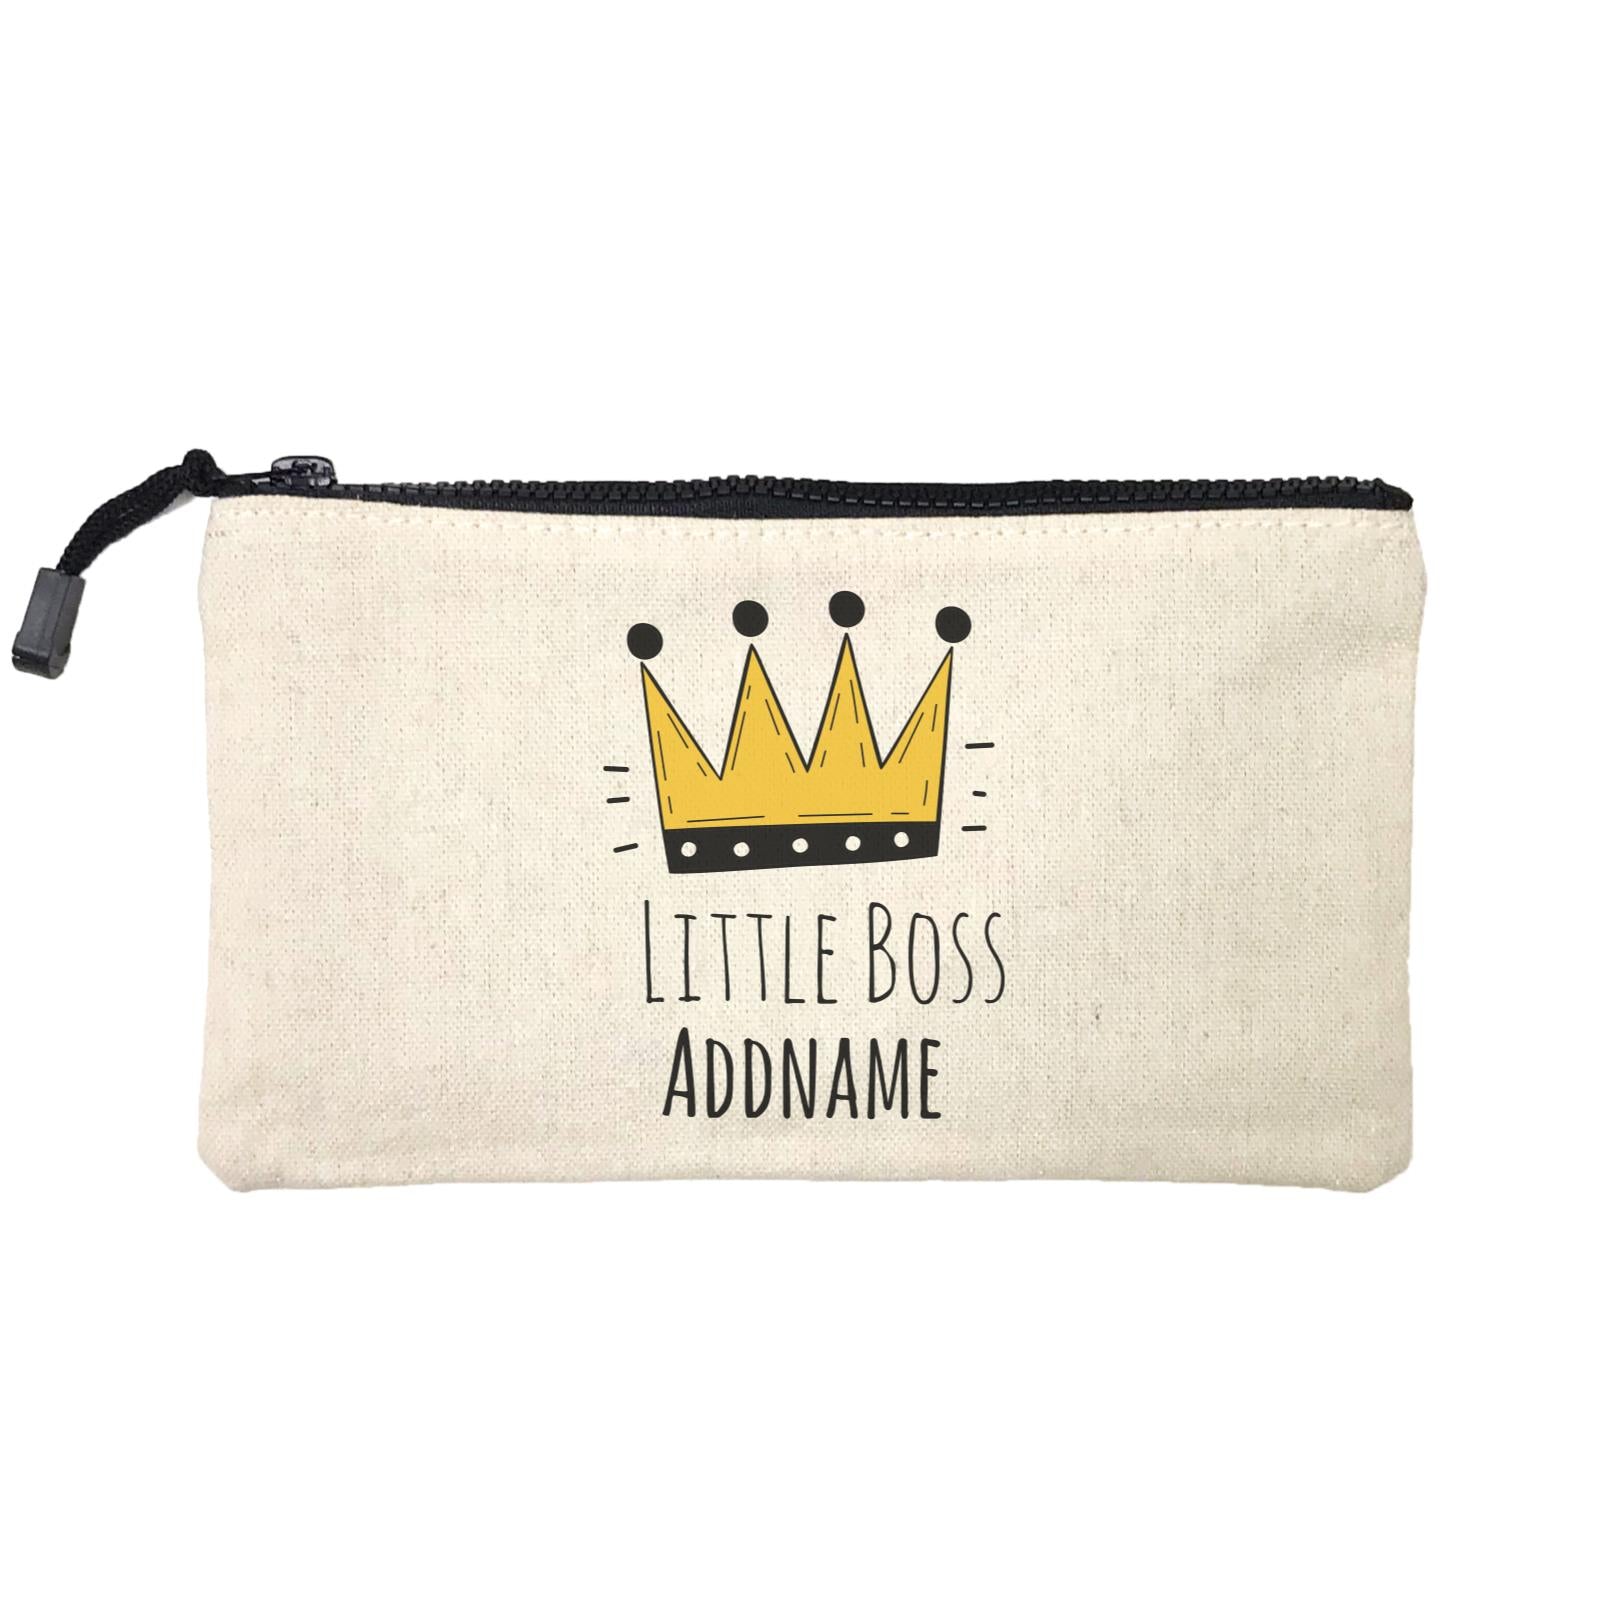 Drawn Crown Little Boss Addname Mini Accessories Stationery Pouch